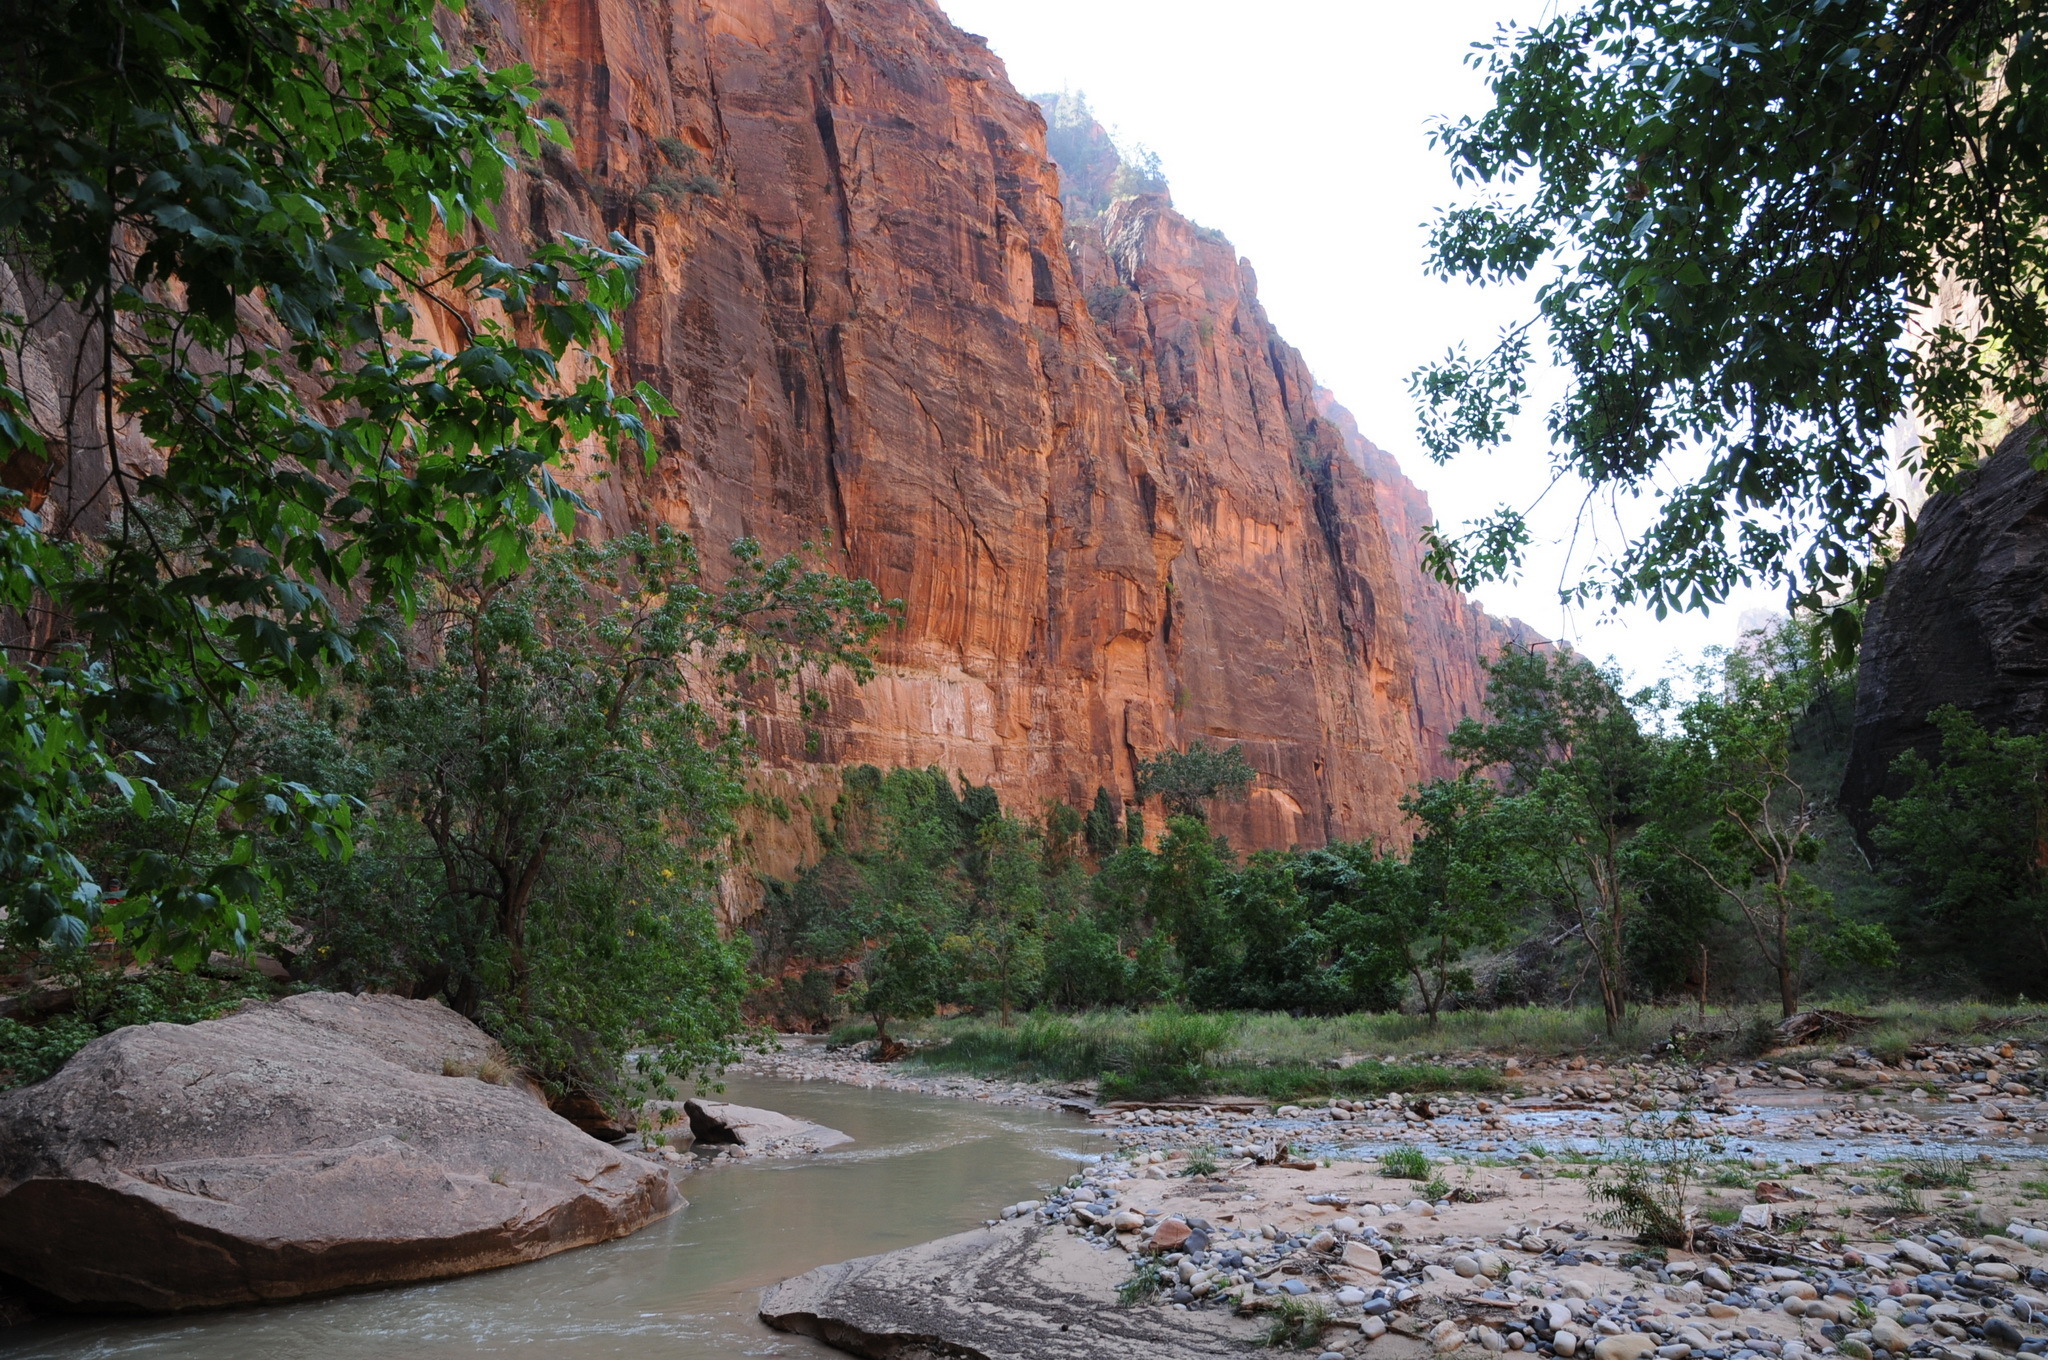 High Quality Photo Of Parks Usa Mountains Zion Utah Rock